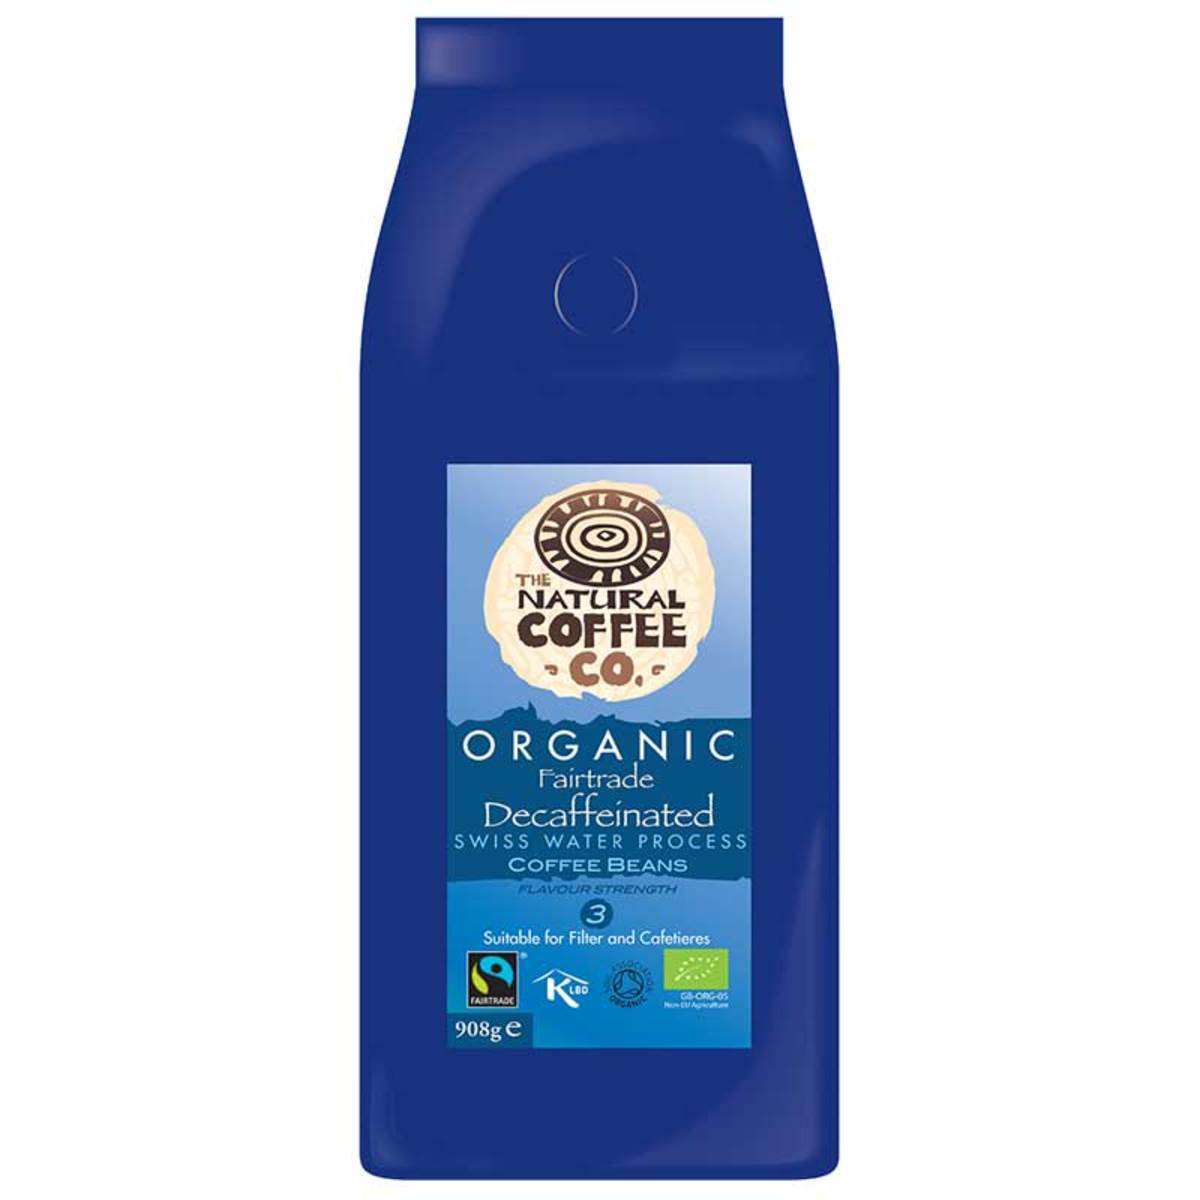 The Natural Coffee Co. Organic Decaffeinated Swiss Water Processed Coffee, 908g Coffee Beans Costco UK Title  